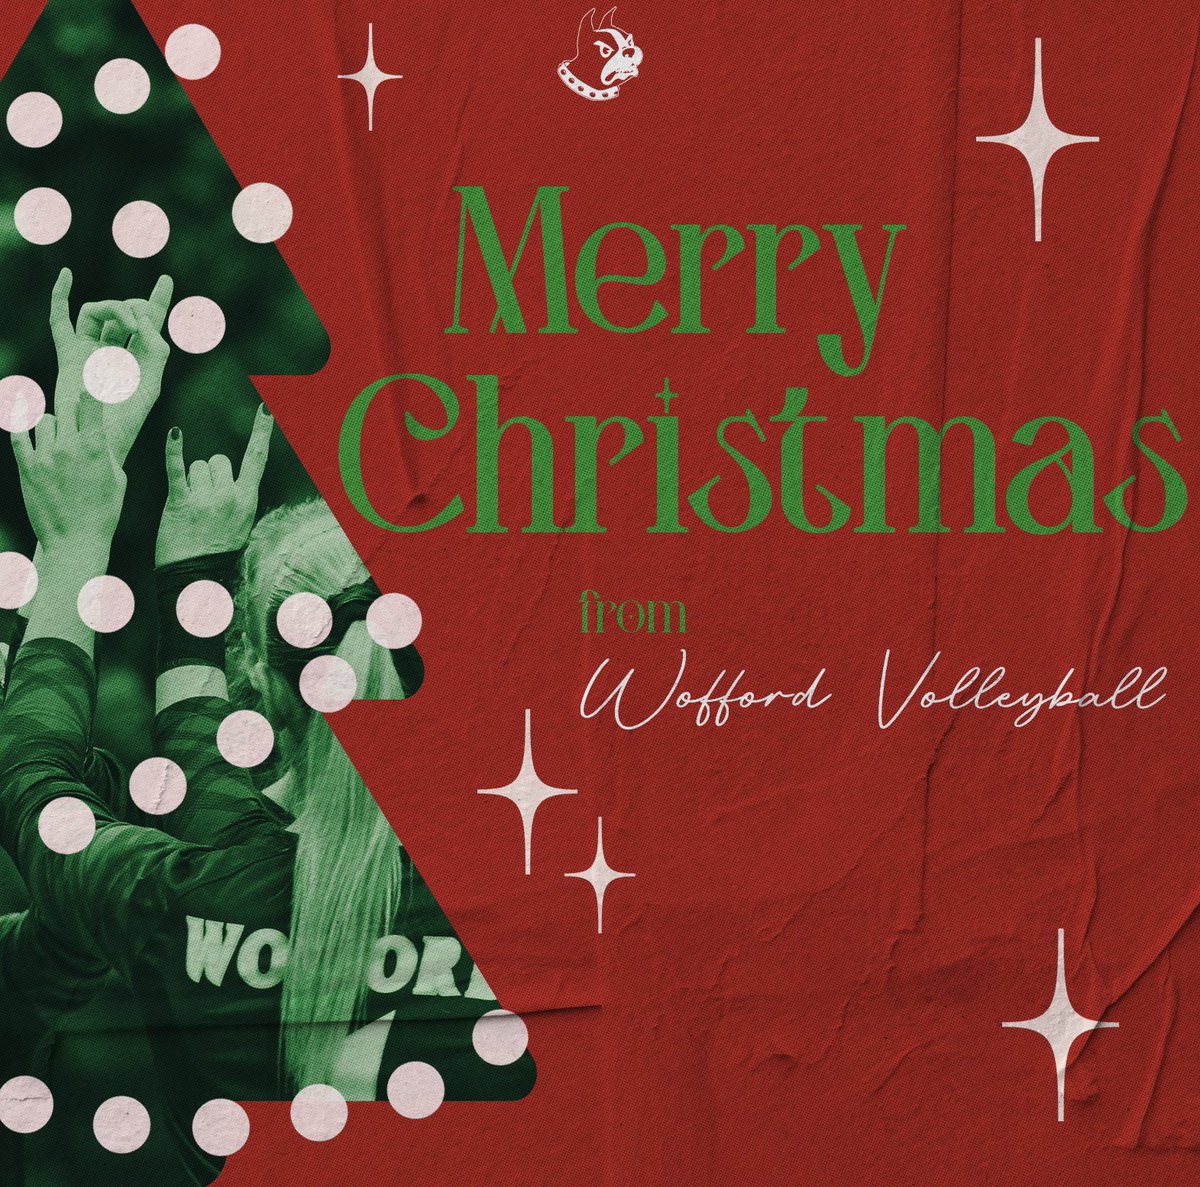 Merry Christmas and happy holidays from our Wofford volleyball family to yours!